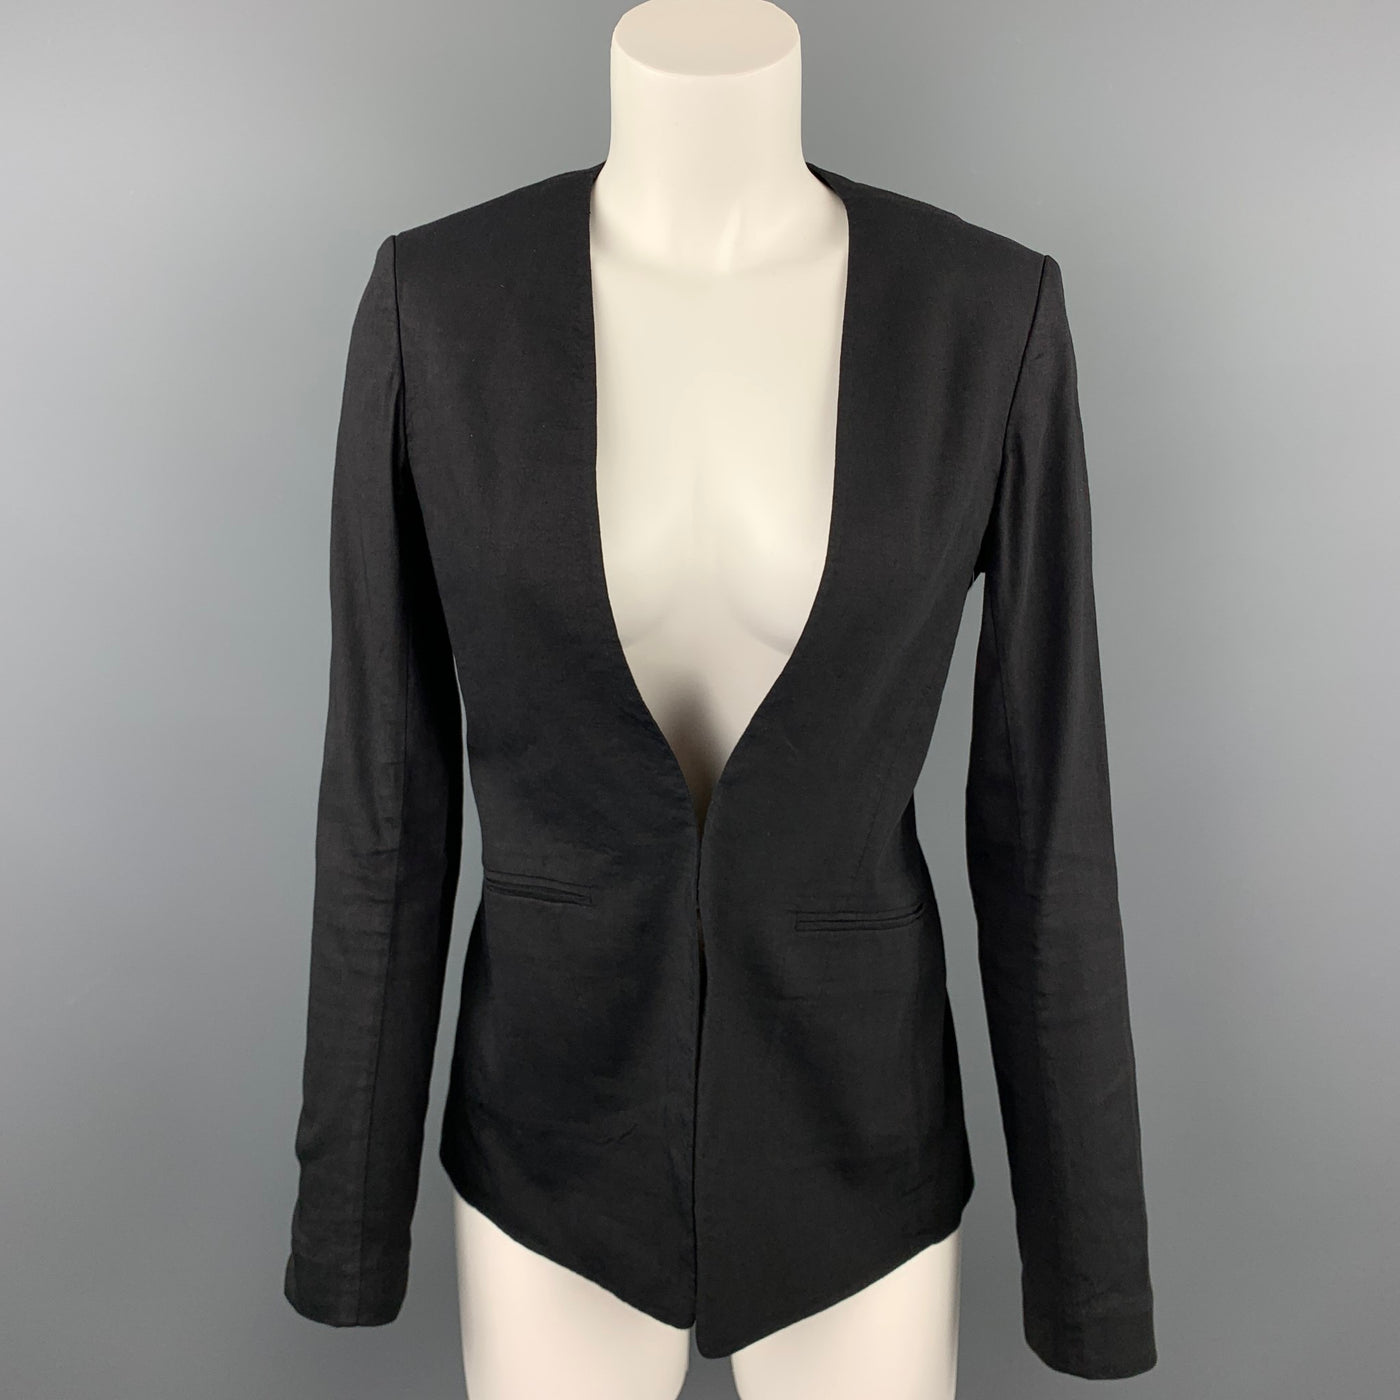 THEORY Size 4 Black Linen Blend Collarless Open Front Jacket